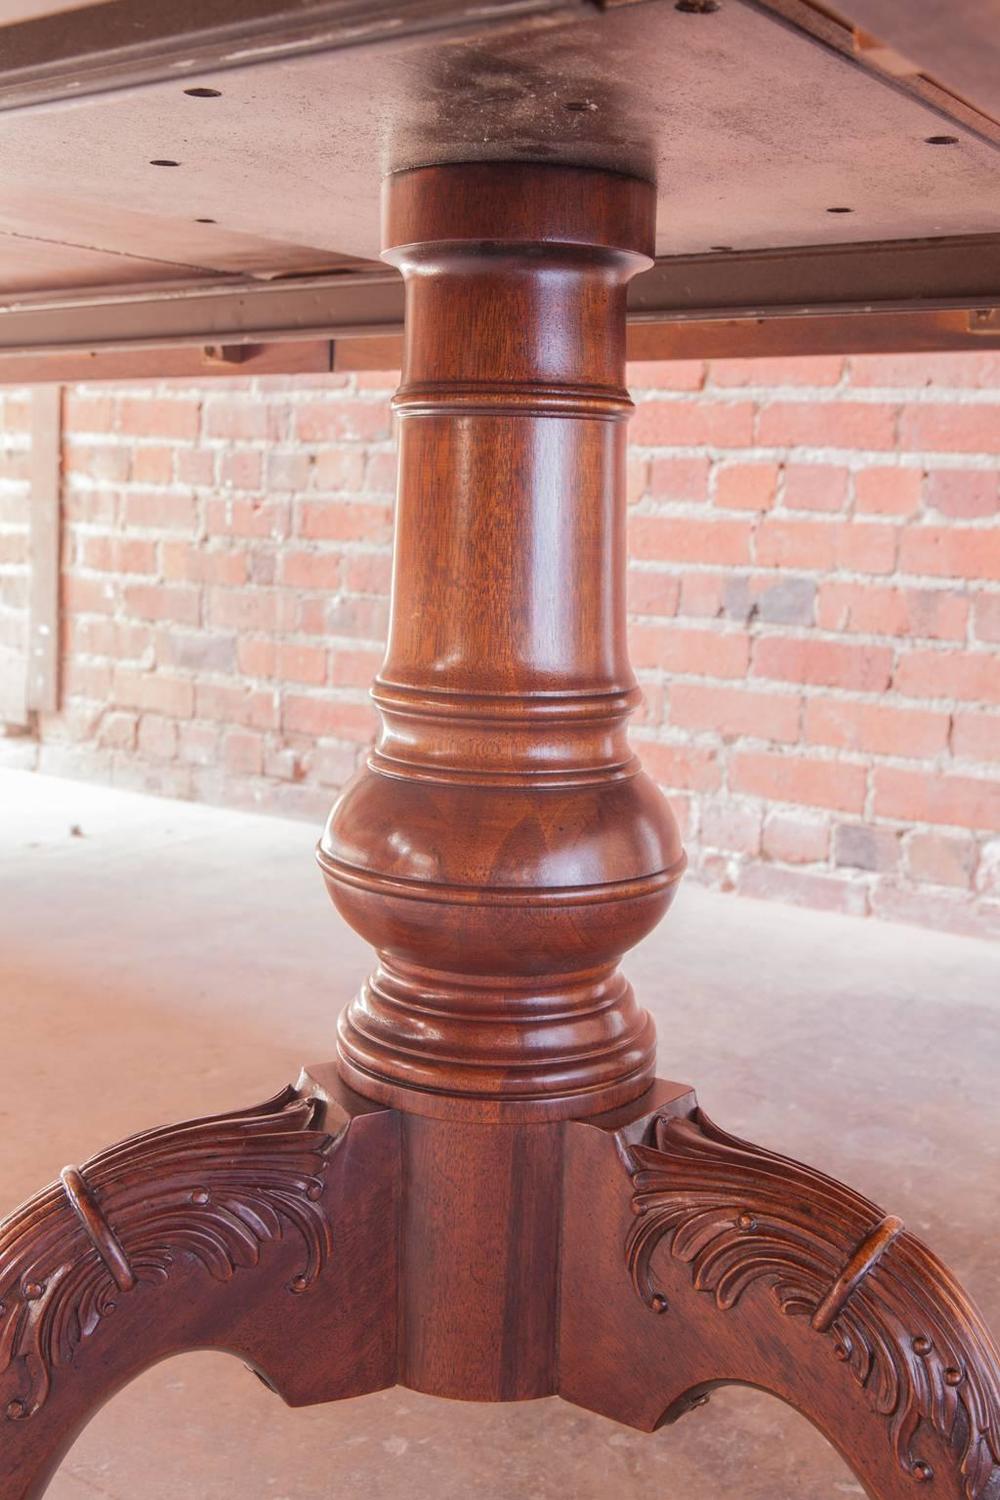 Fine Two Pedestal Mahogany Dining Table by Henredon at 1stdibs